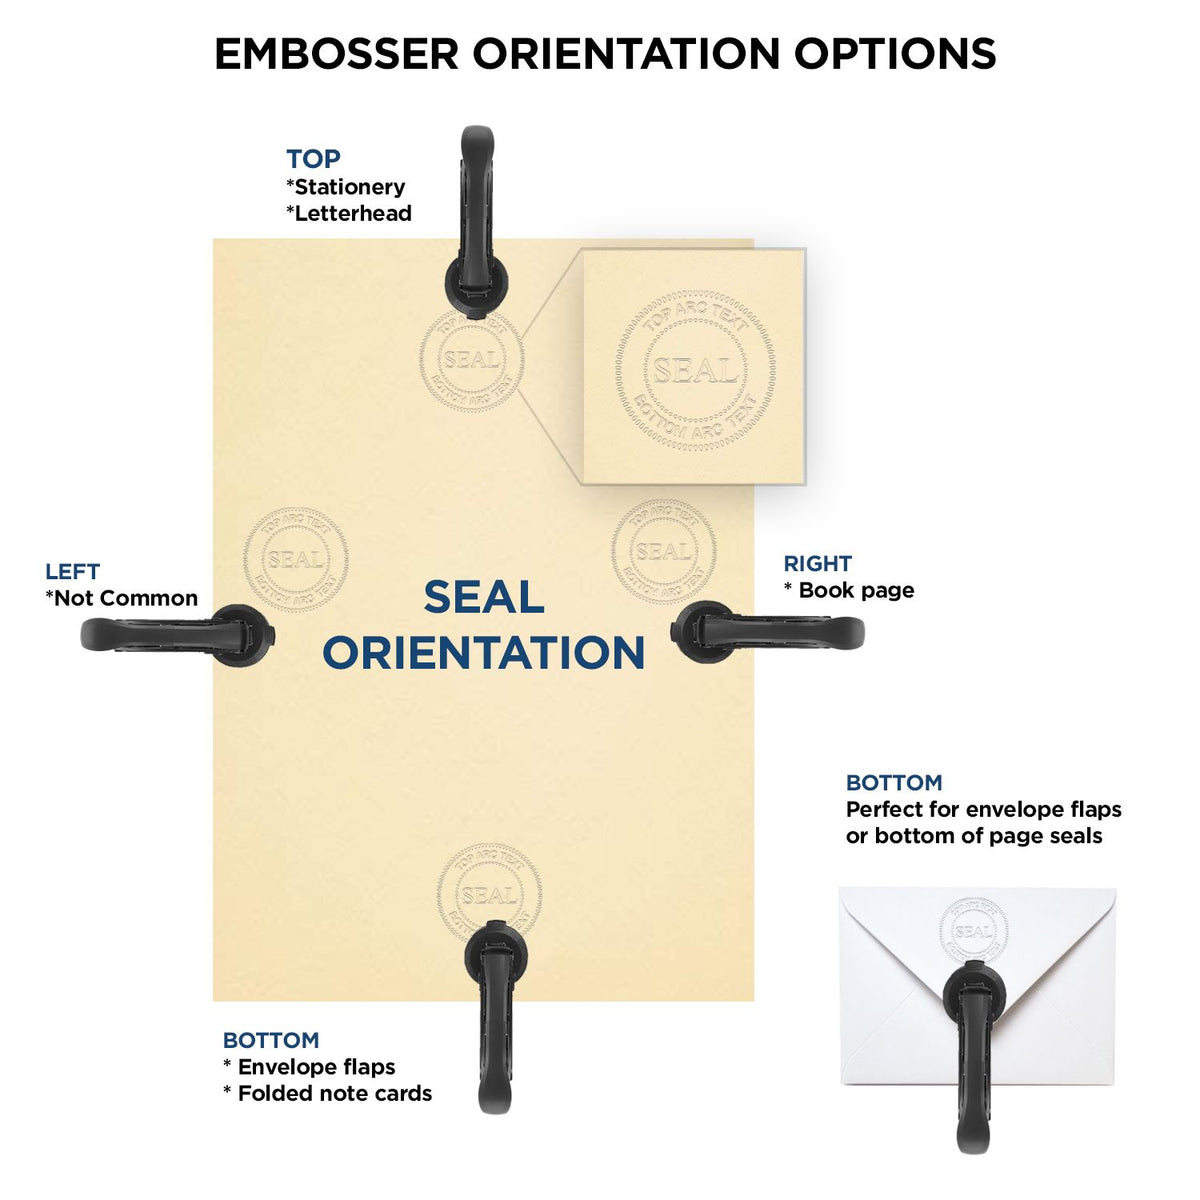 An infographic for the Soft Pocket South Carolina Landscape Architect Embosser showing embosser orientation, this is showing examples of a top, bottom, right and left insert.